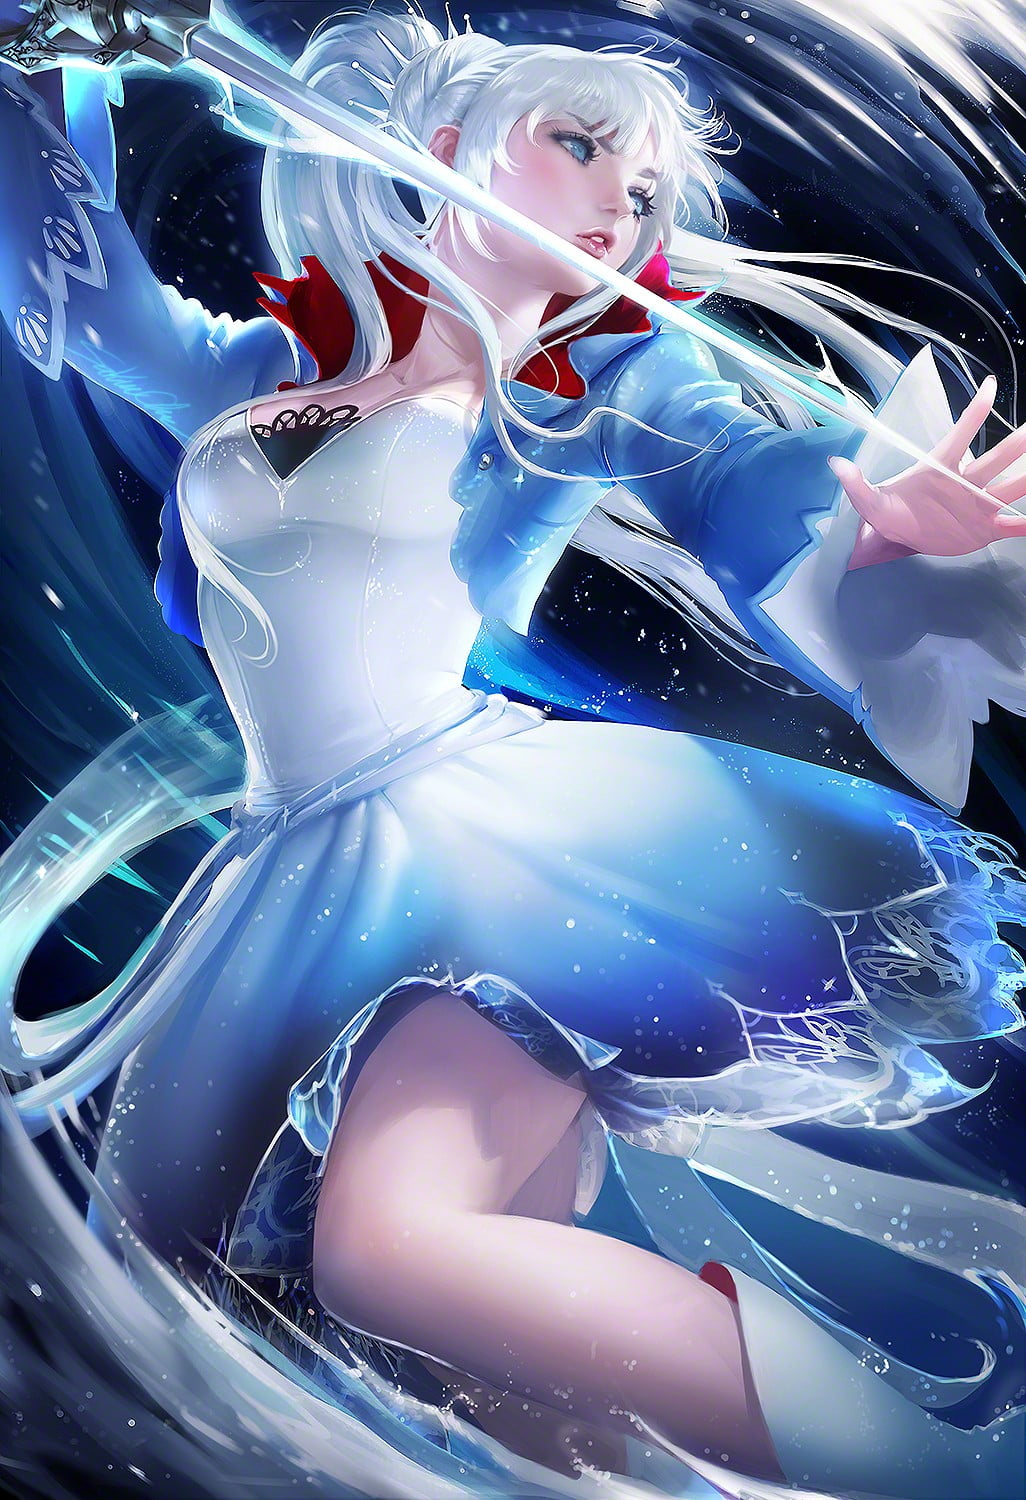 female anime character in blue and white dress, Sakimichan, RWBY, Weiss Schnee, white hair